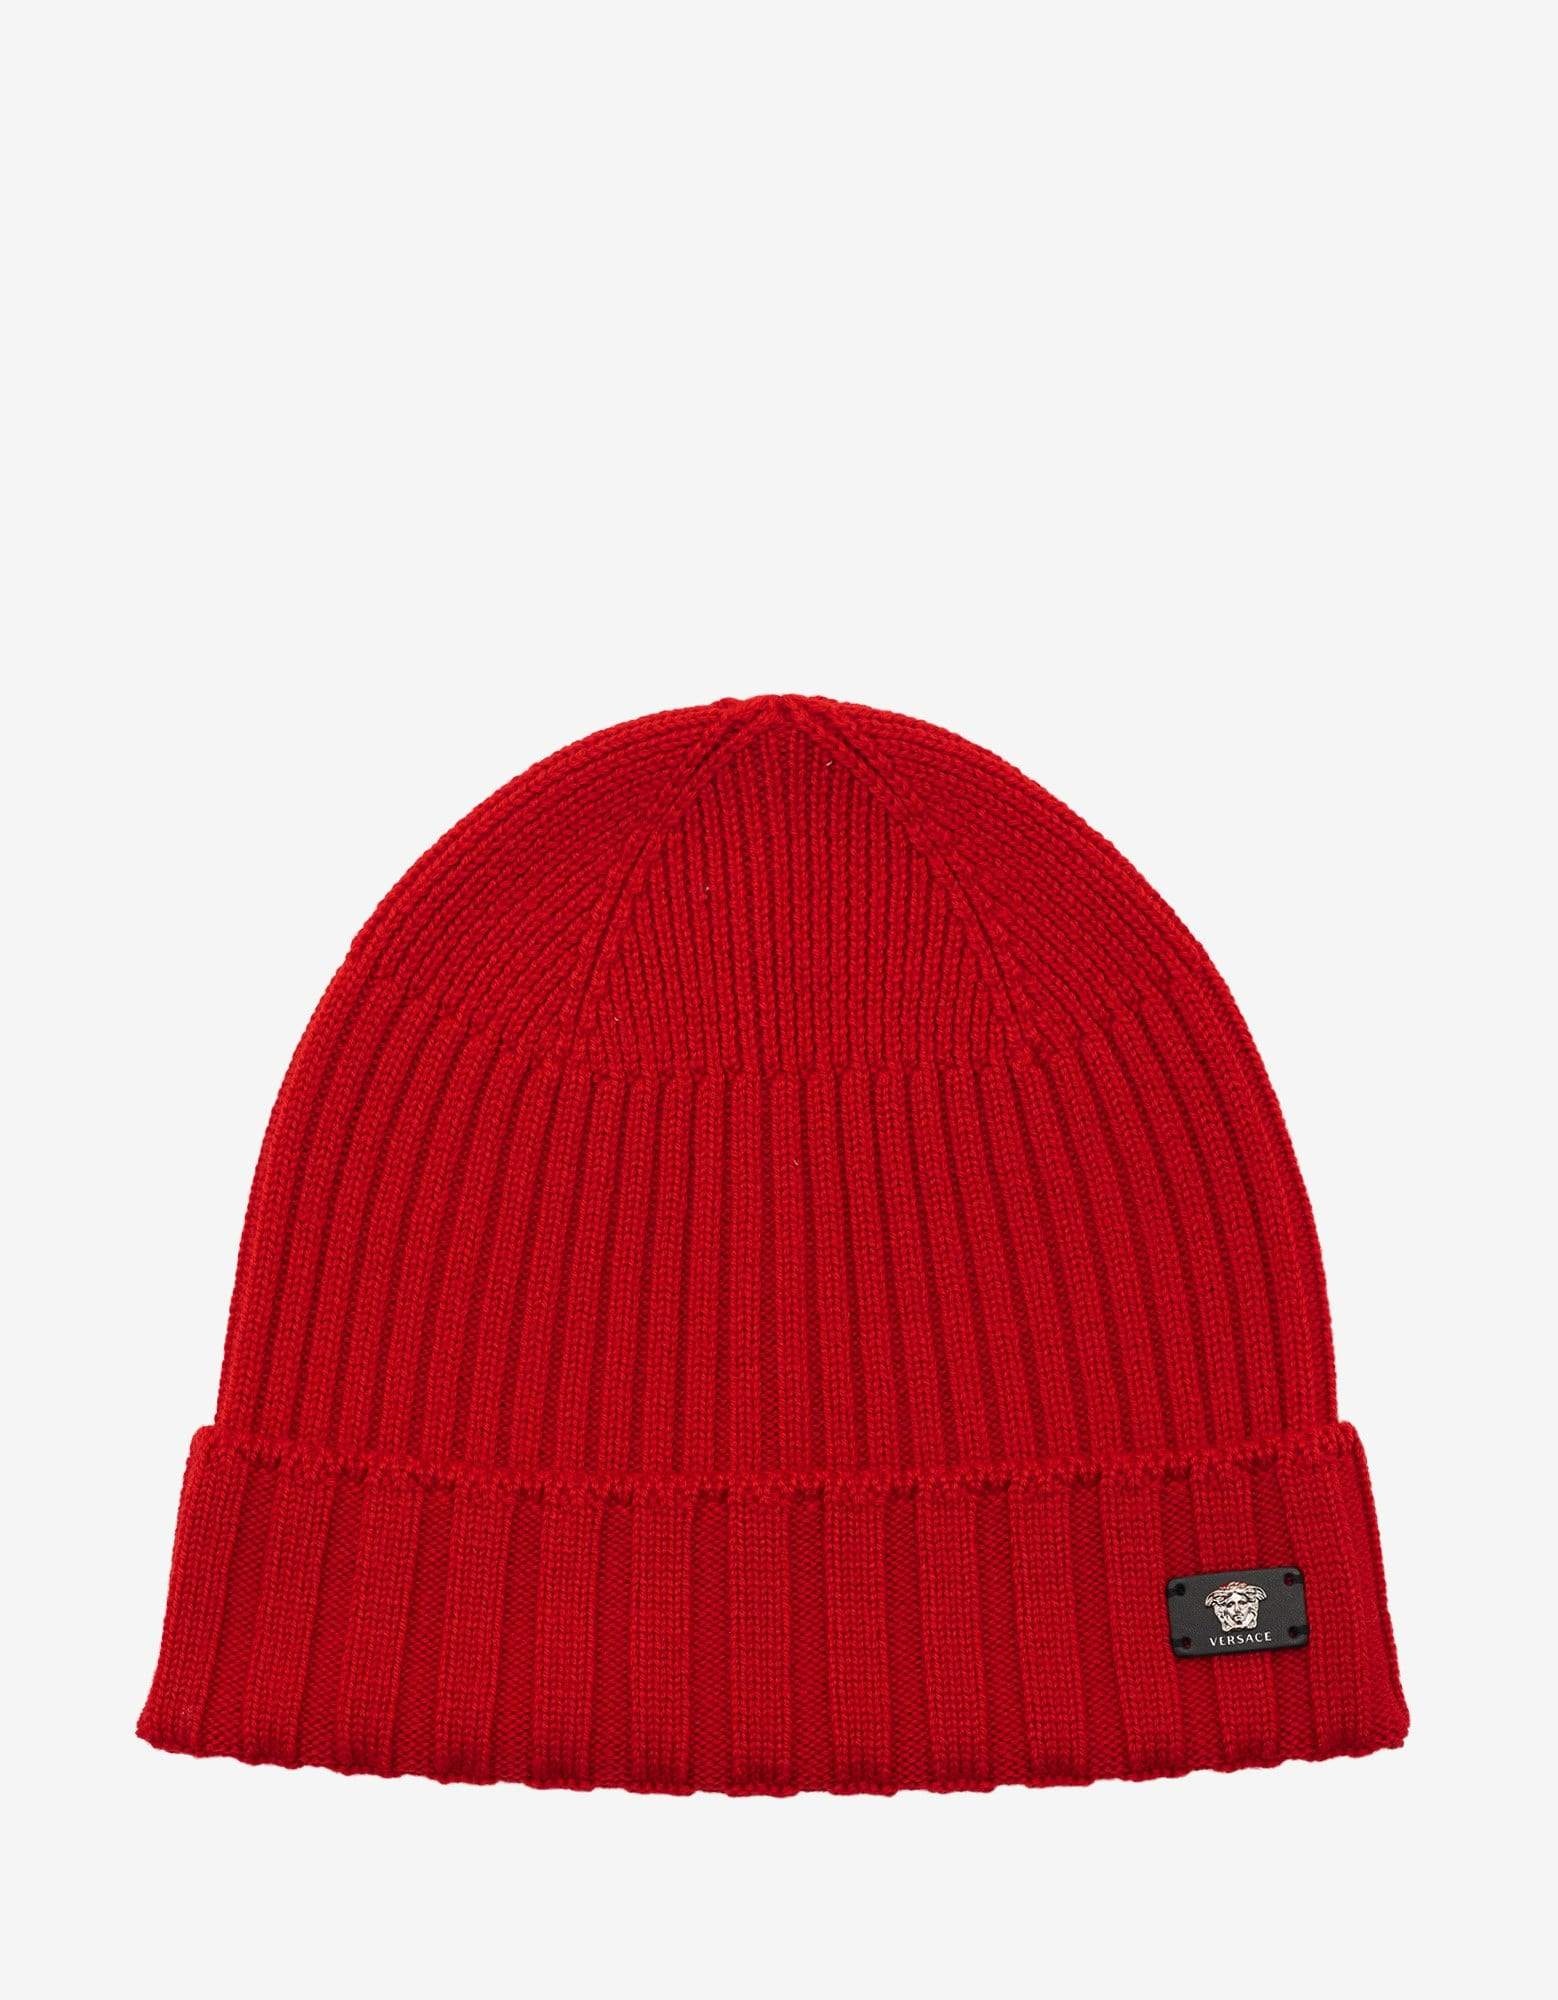 Red Ribbed Wool Beanie Hat - 1